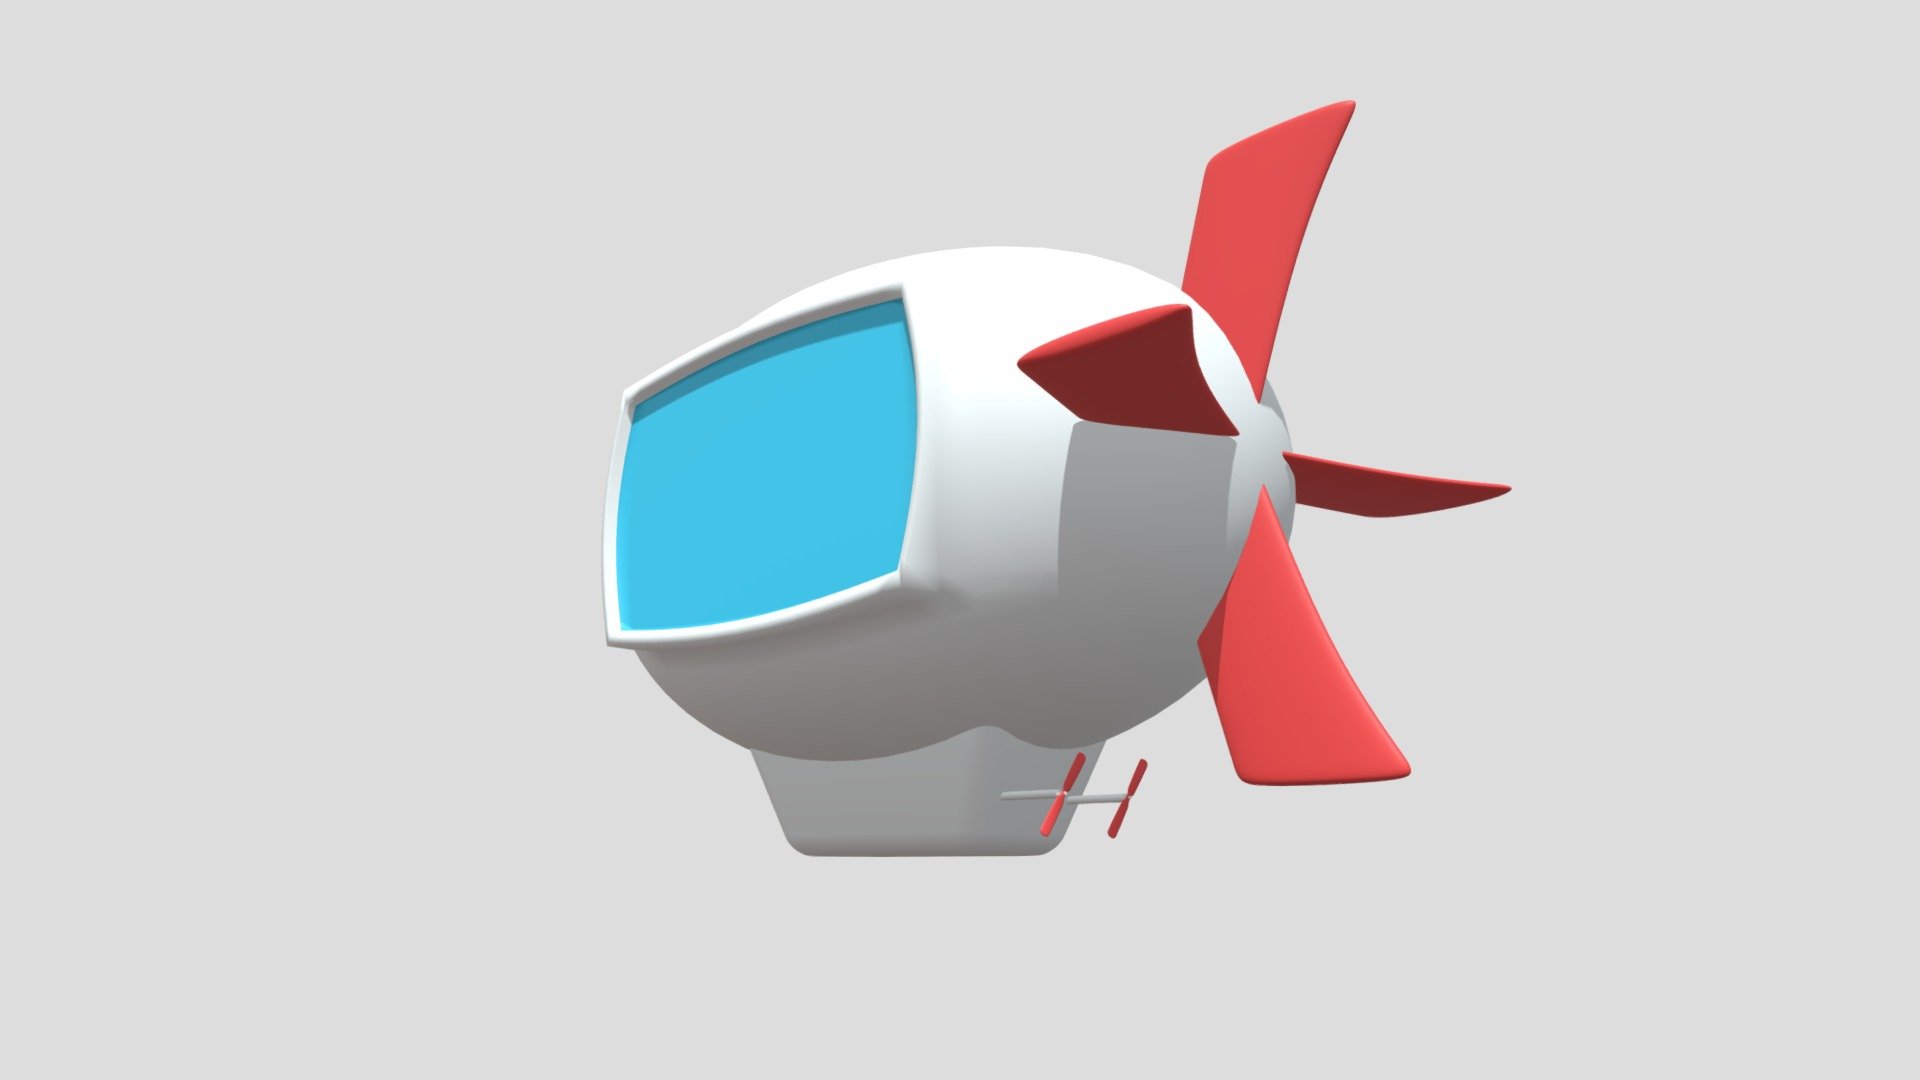 Cartoon Airship.

Made with Blender 2.8.

Rendered with Cycles.

system units -: m.

Included 7 objects.

Polygons: 13,612.

Vertices: 13,696.

Formats: . blend . fbx . obj, c4d,dae,fbx,unity.

Thank you 3d model